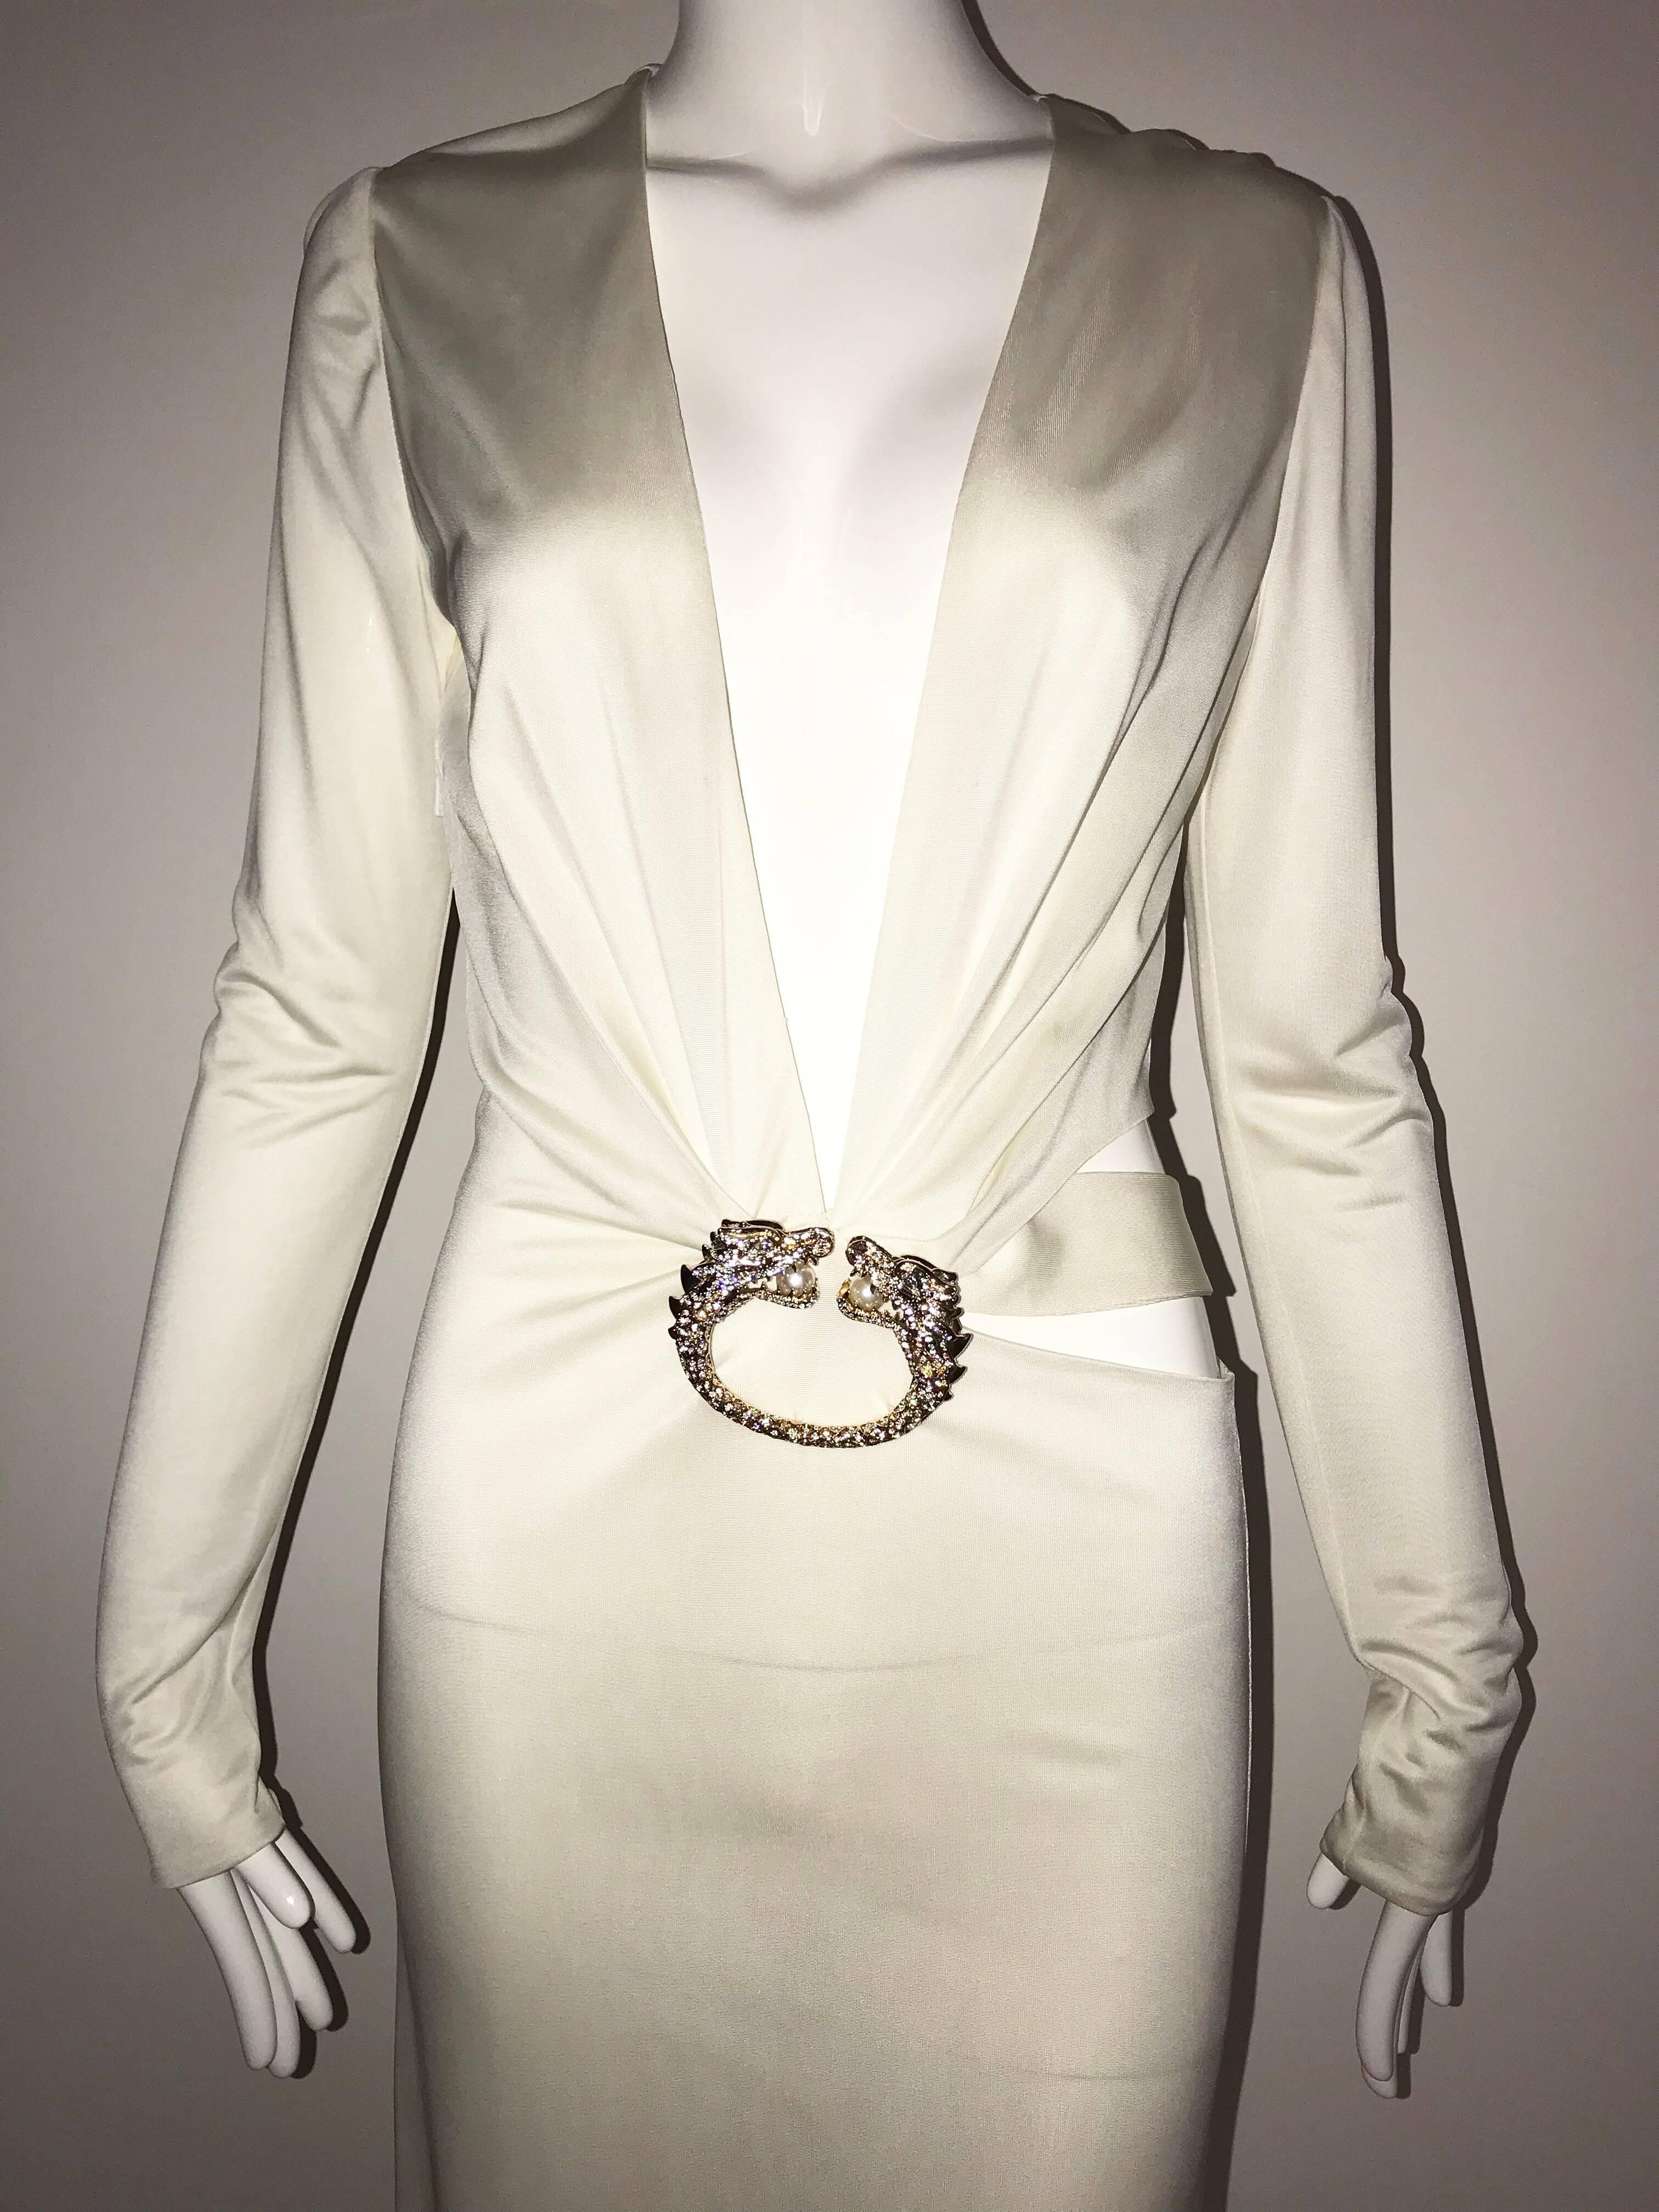 Sexy Gucci White Matte Jersey Gown designed by Tom ford. Plunging Neckline and bare back! Perfect gown for Holiday party. Marked size 40 italian and it fit best for size US 4 or 6. 
Dress is only worn once.